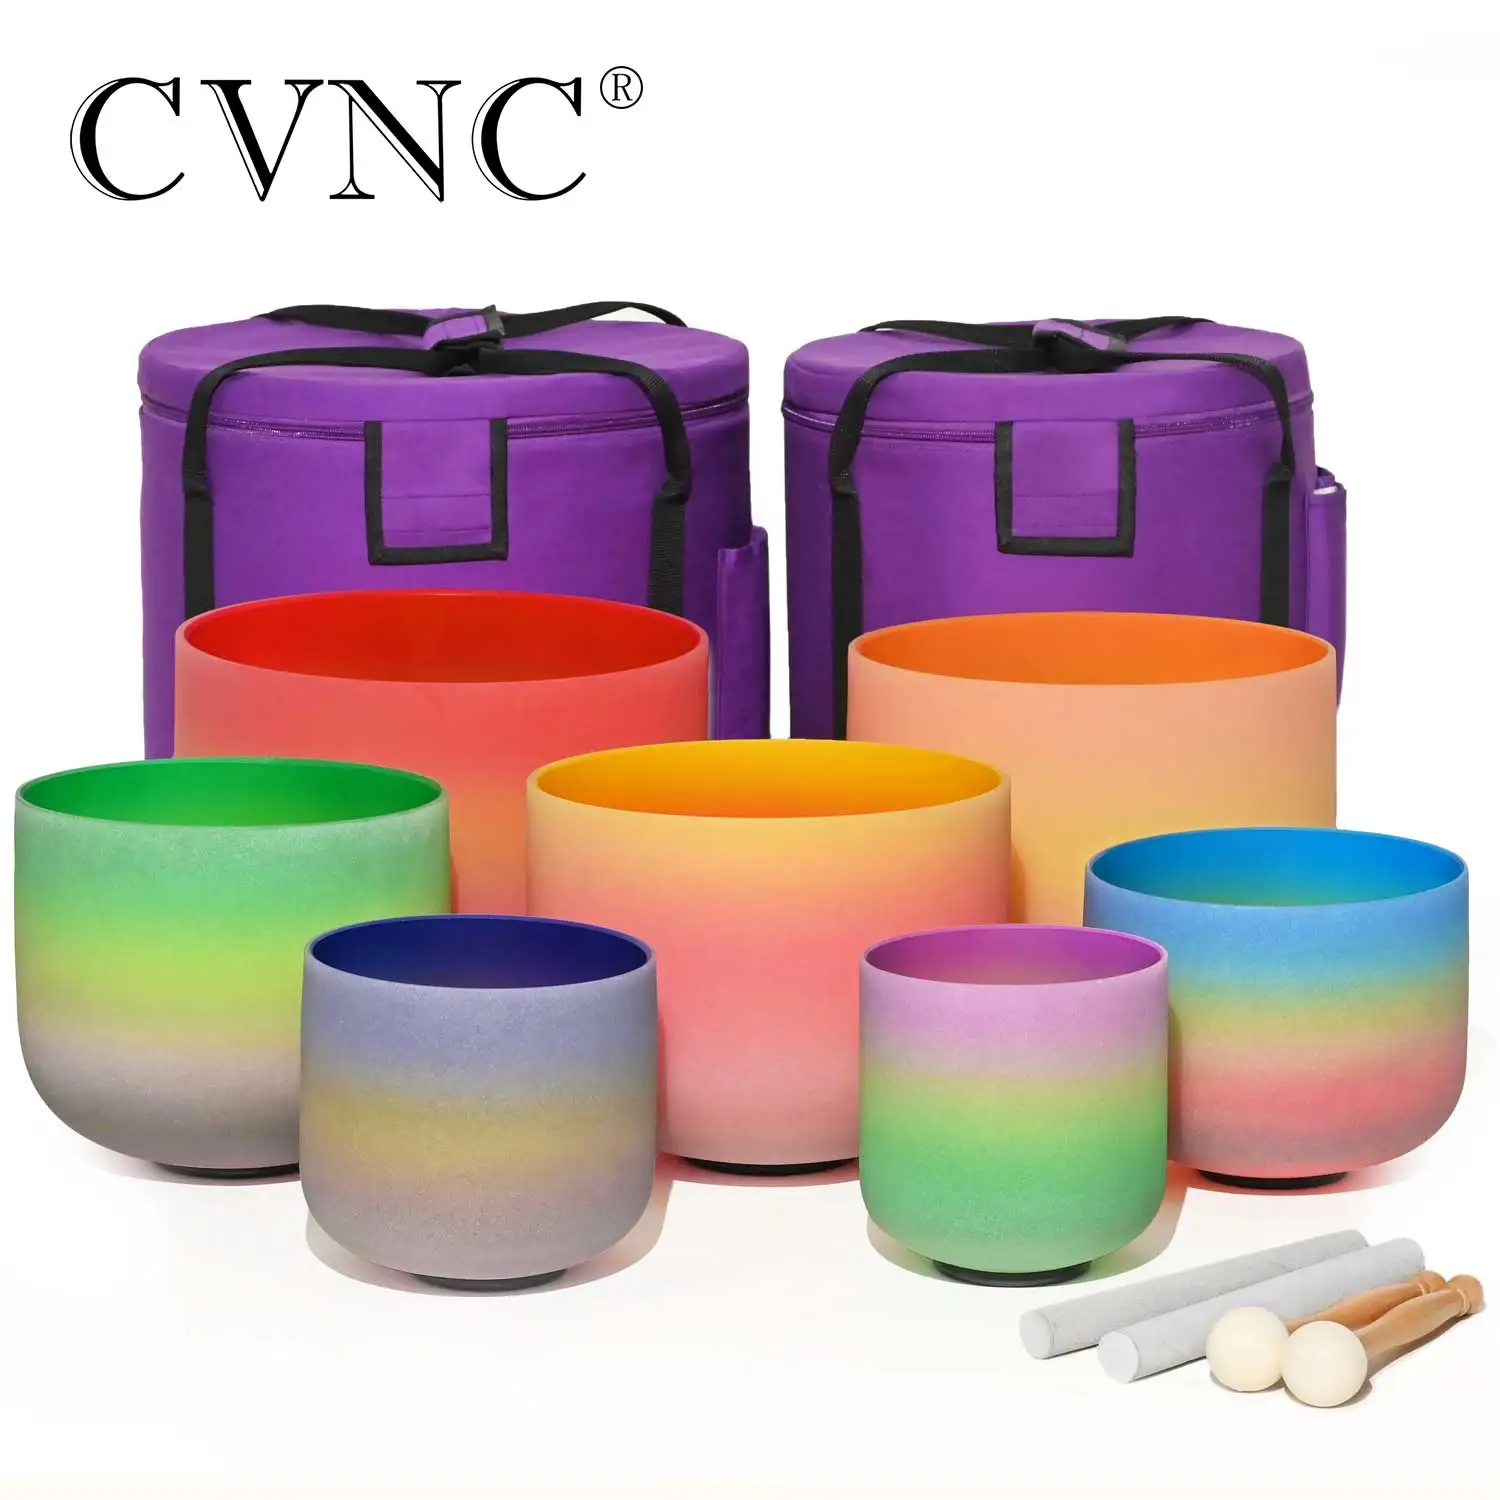 

CVNC 6- 12 Inch Crystal Singing Bowl 7 Chakra Set Rainbow Design Instrument Colored Sound Healing Relaxation With Free Pur Bags